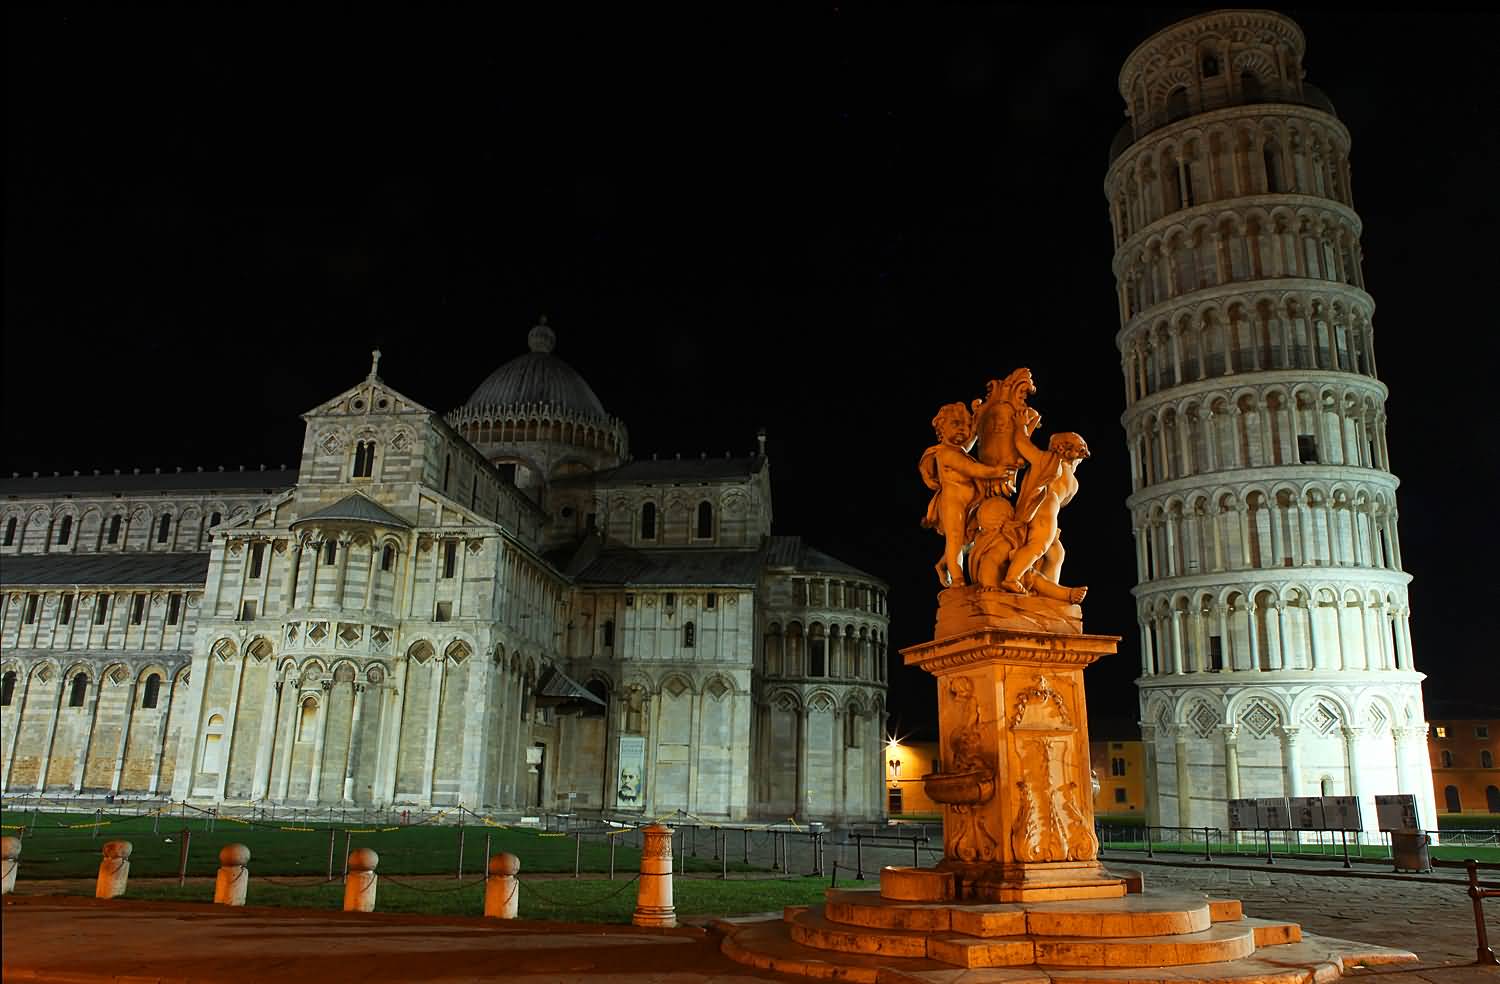 Statues Of Three Angels And Leaning Tower Of Pisa Illuminated At Night